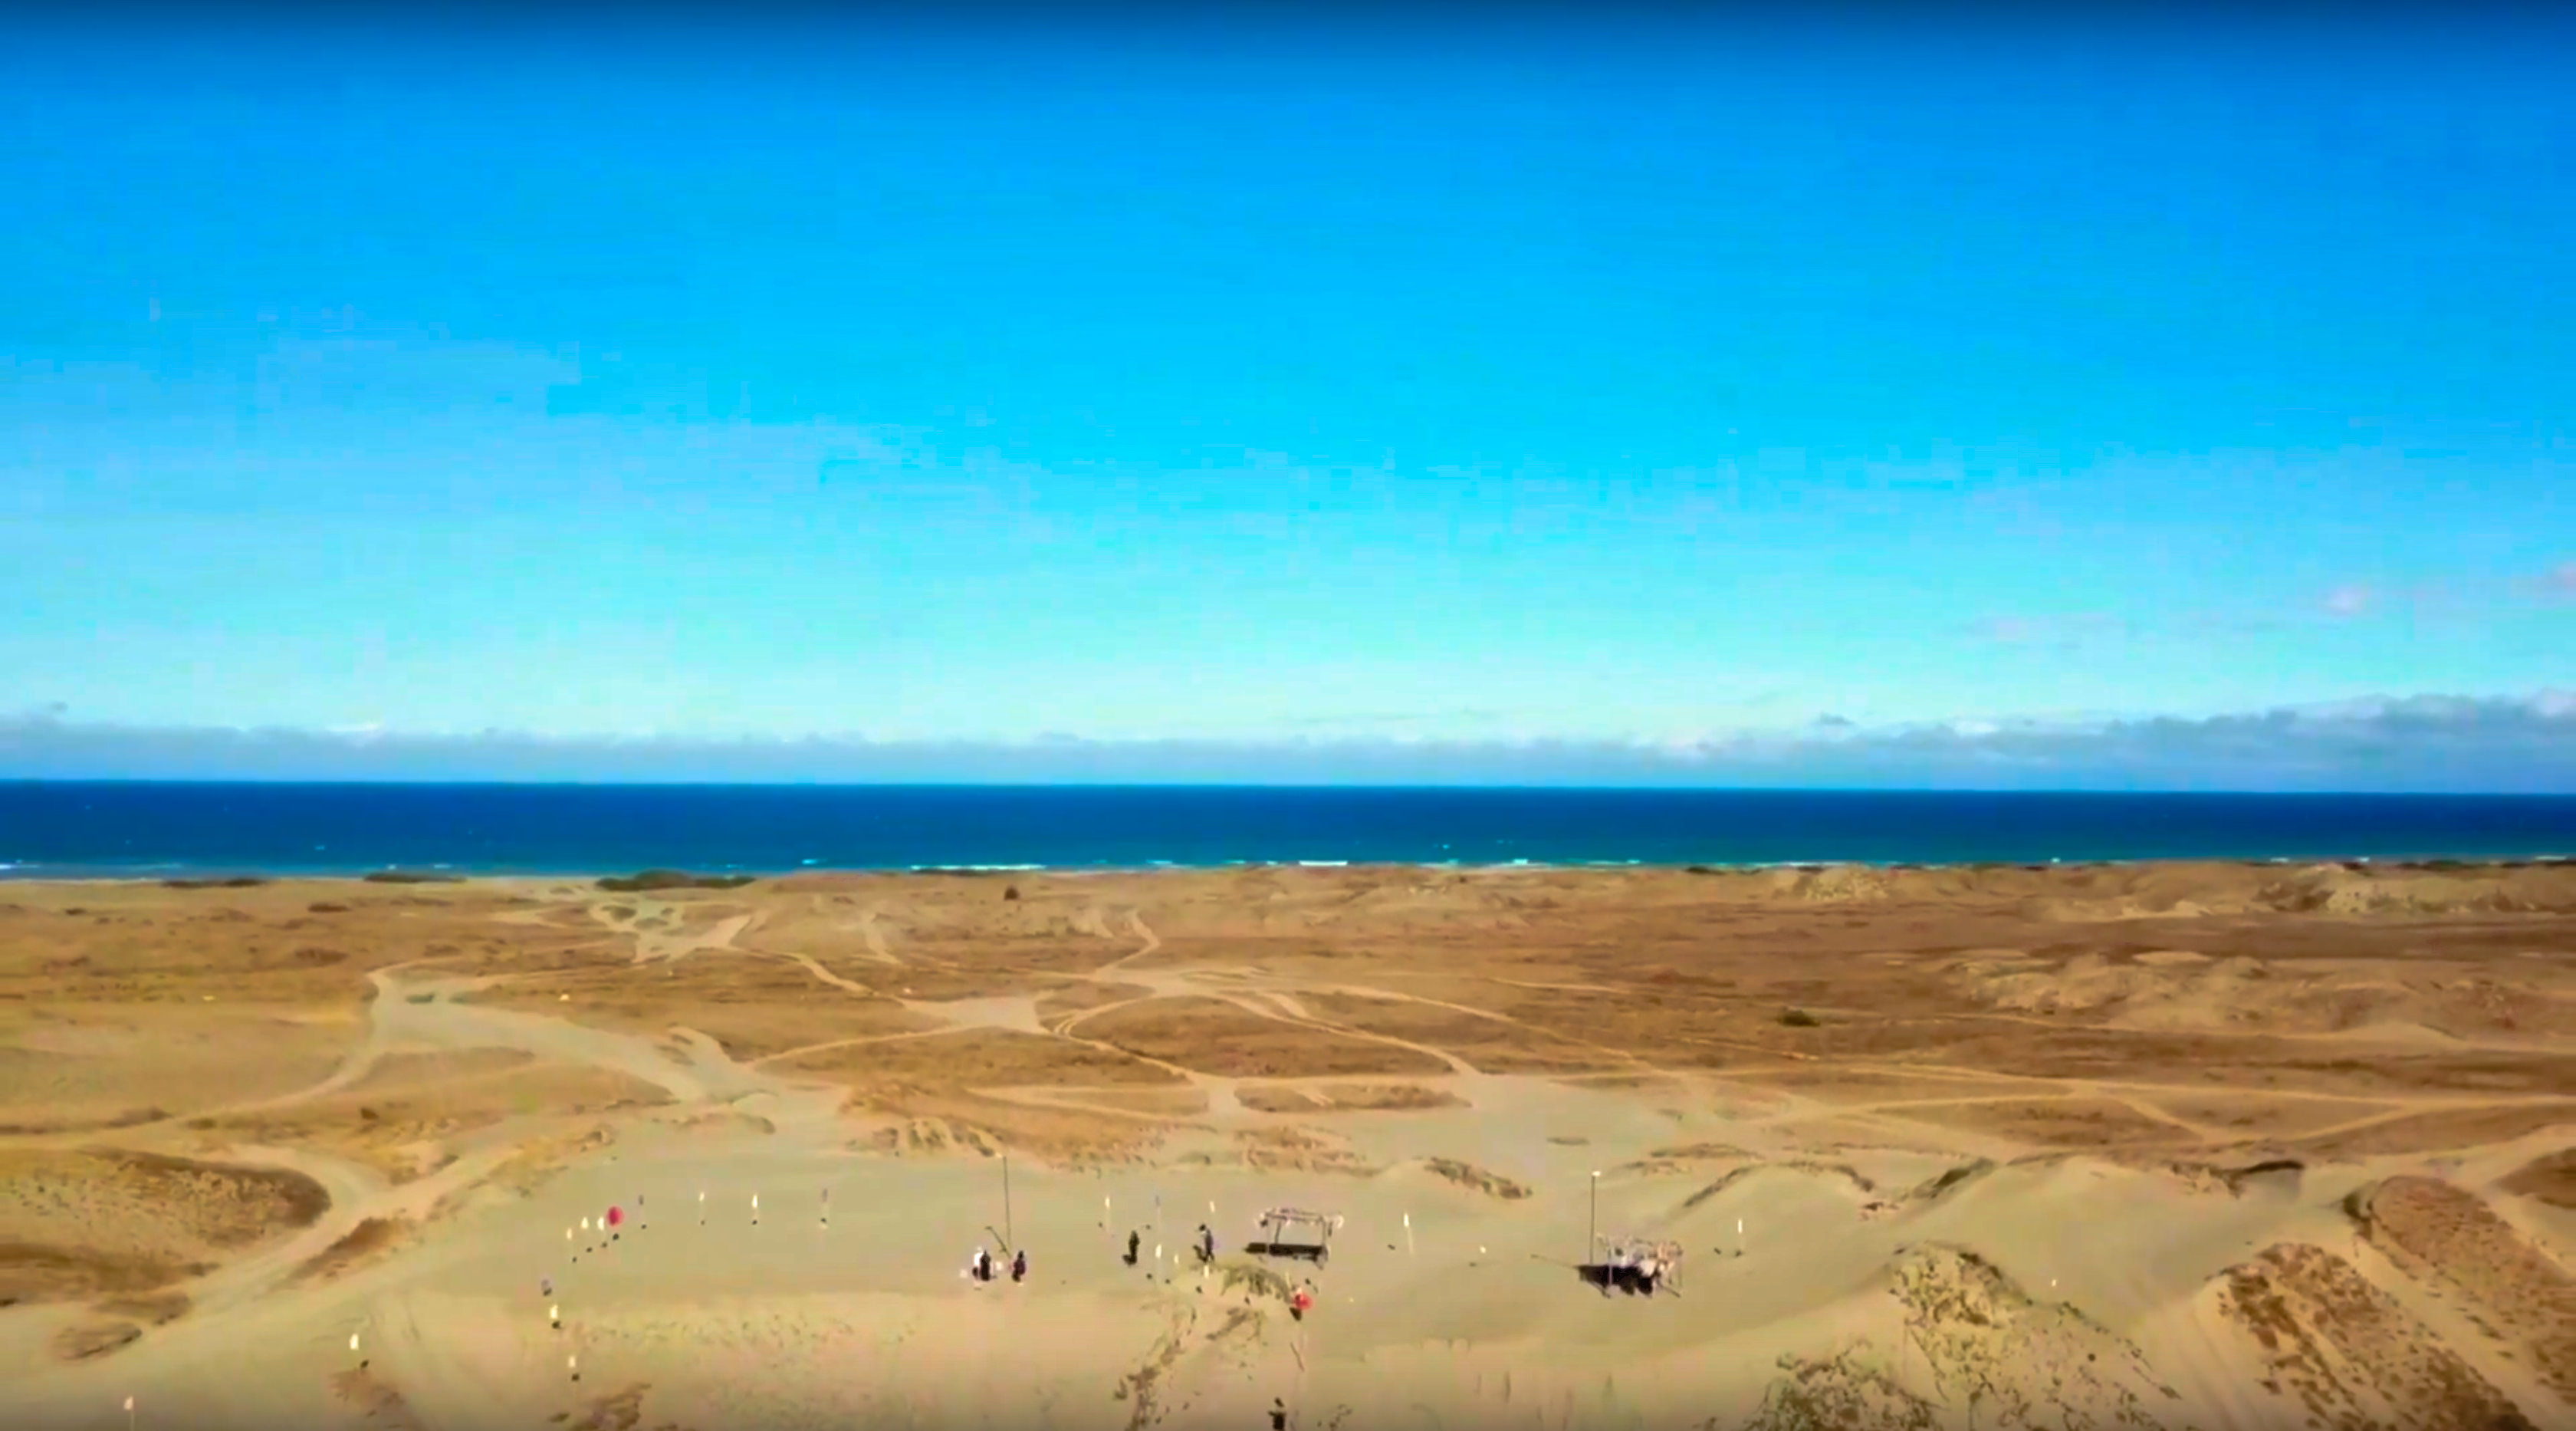 VIDEO: Sand Dunes in the Philippines Aerial View